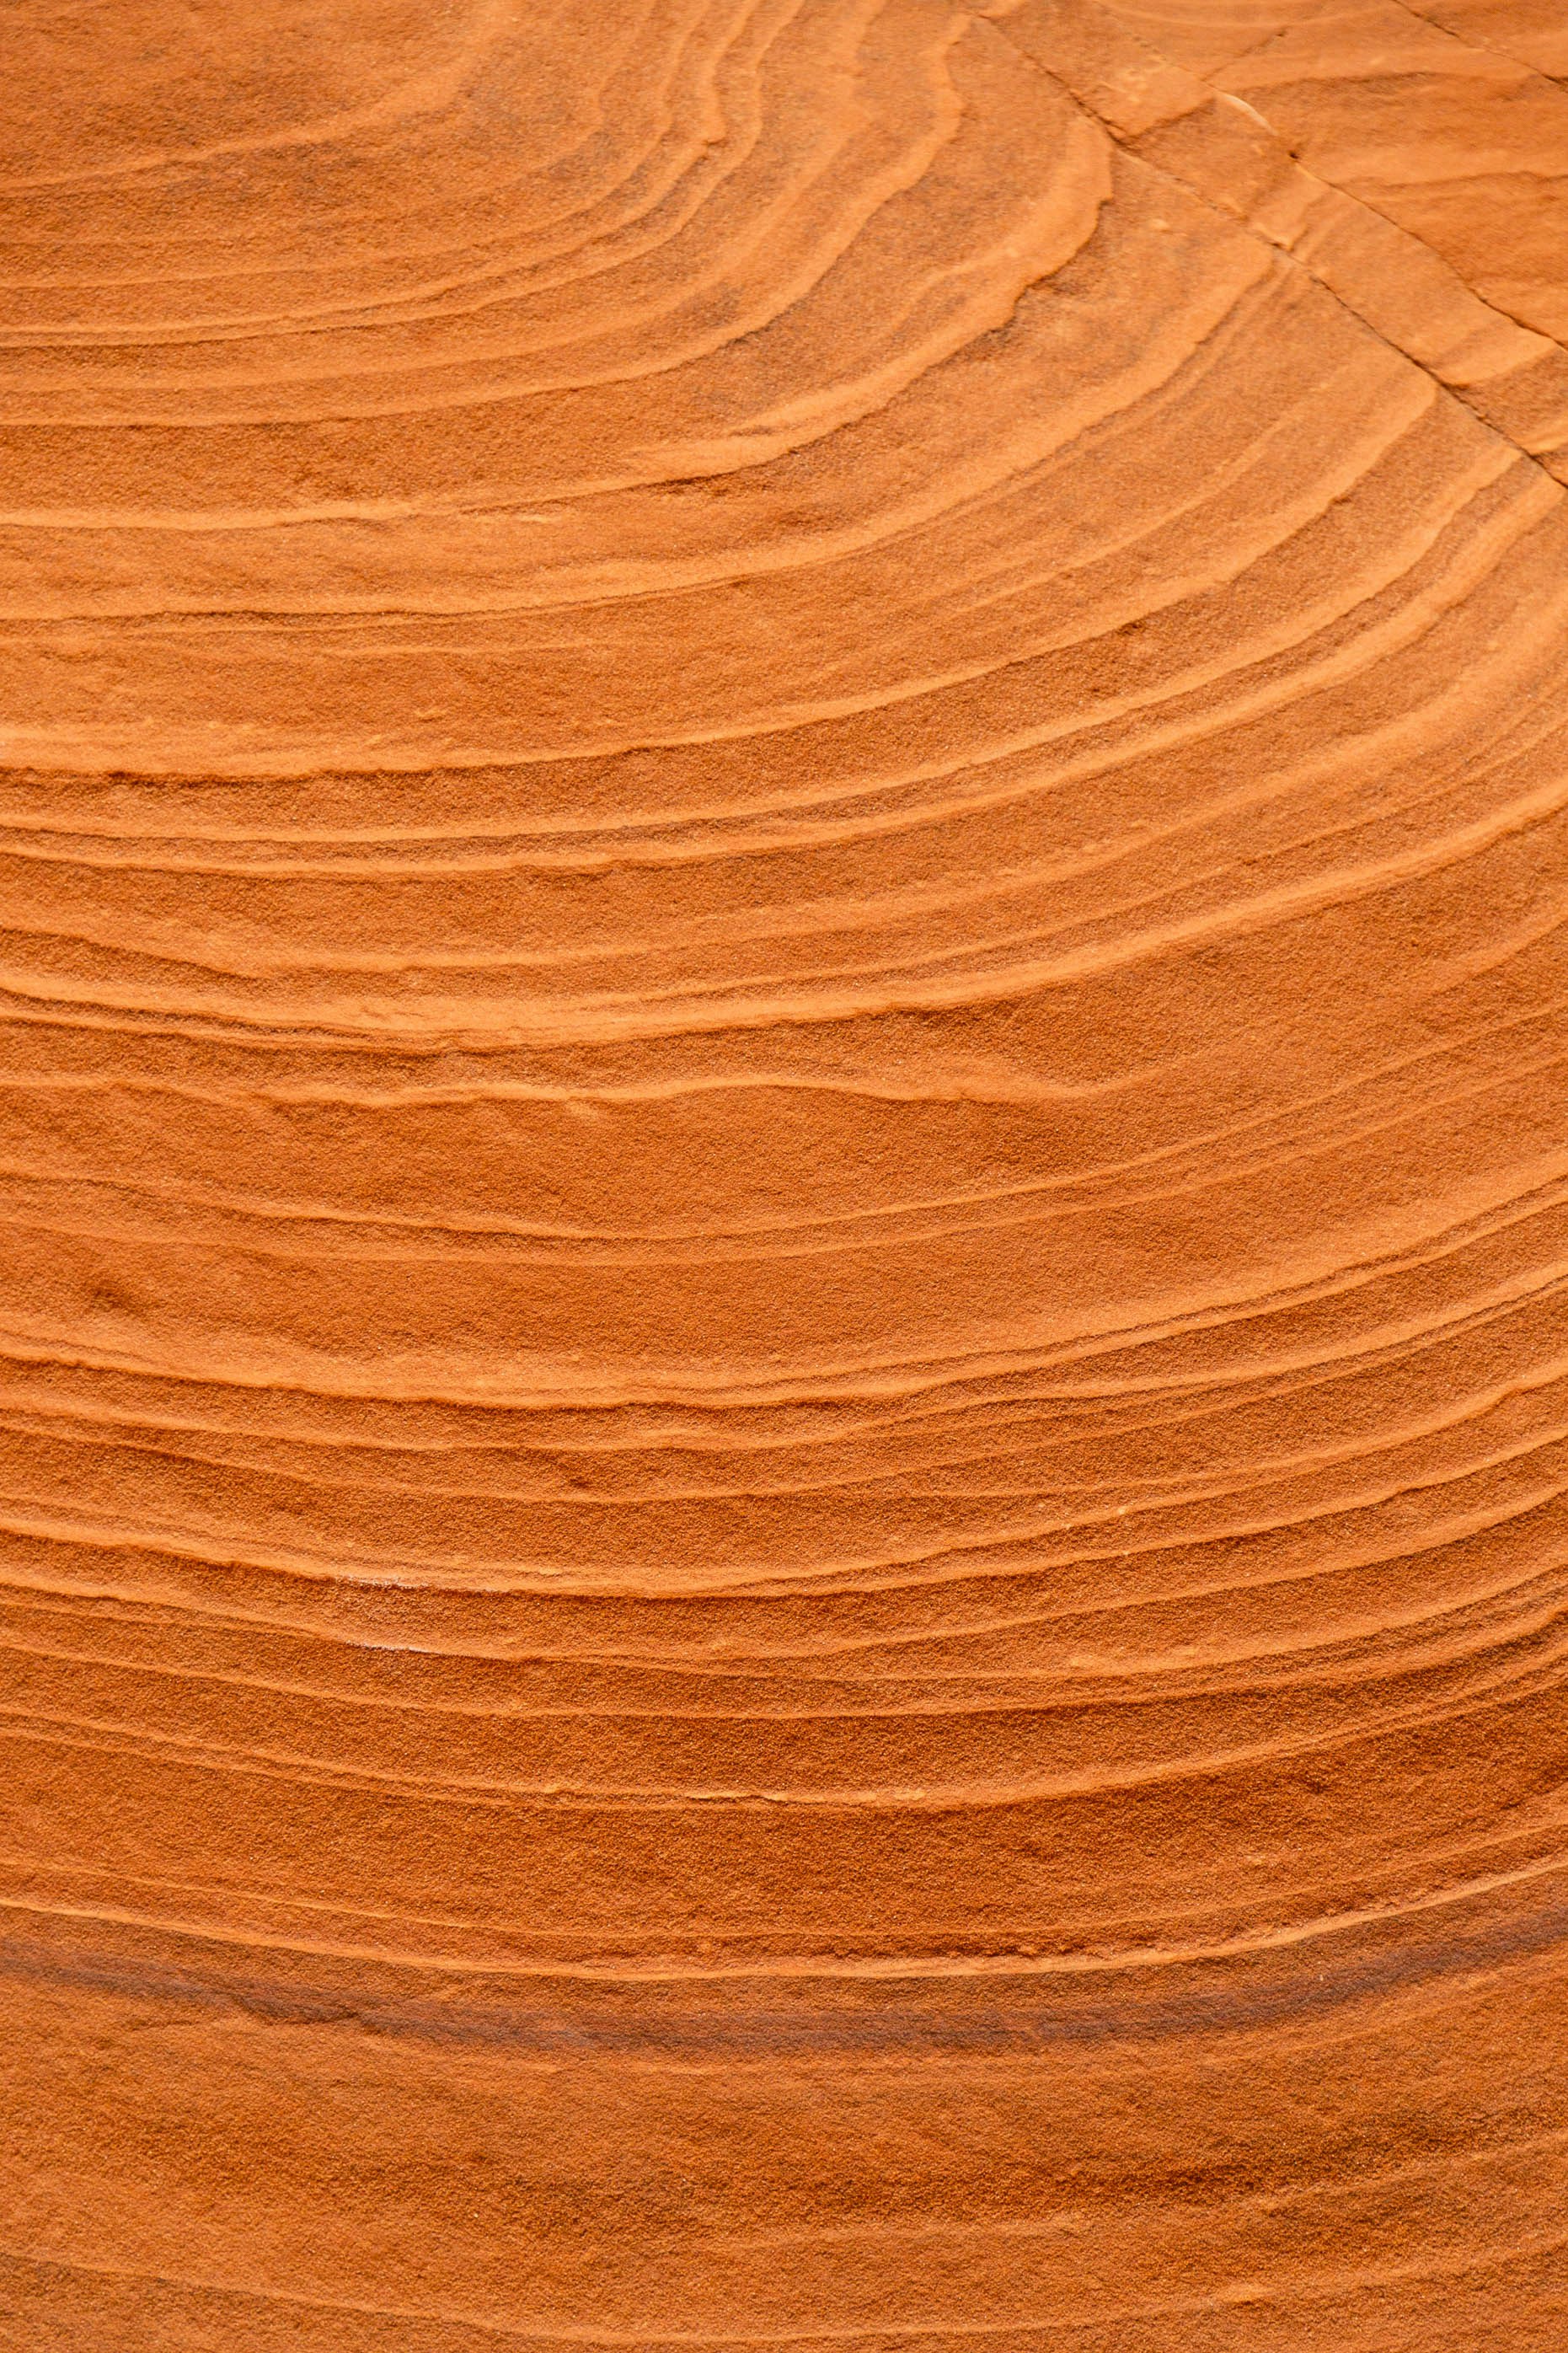 Close up of sandstone in a slot canyon